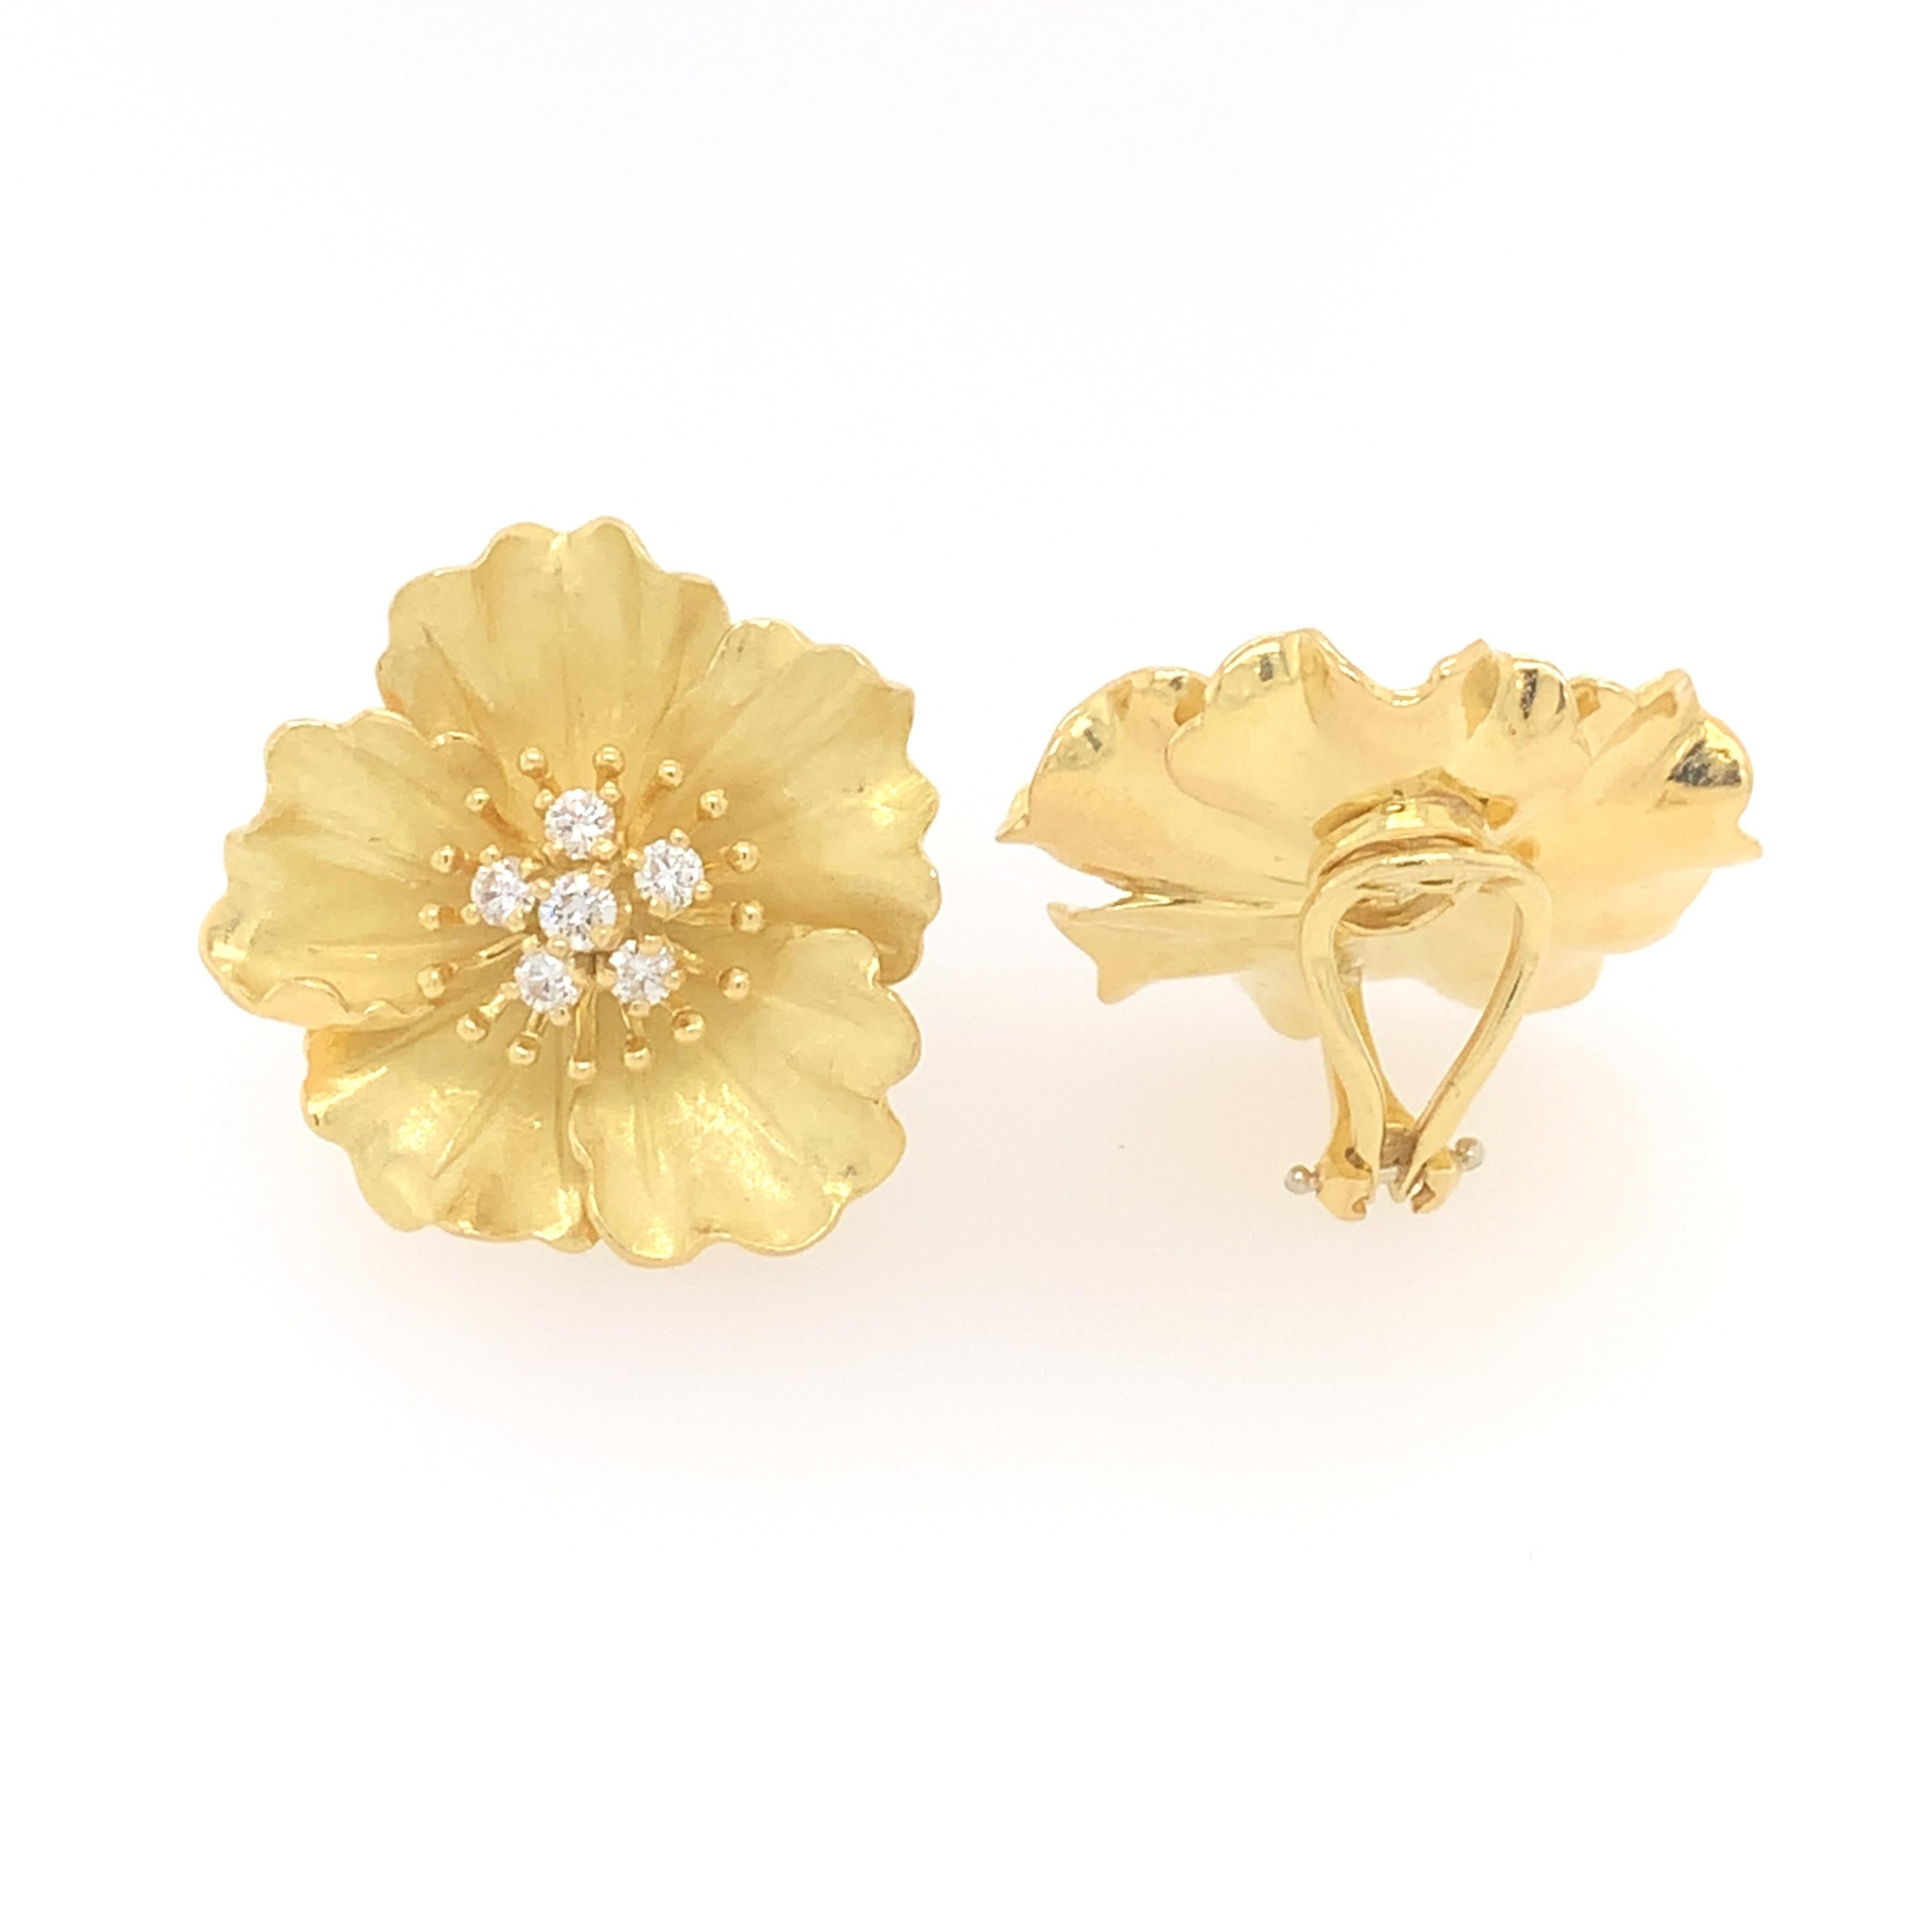 This breathtaking, vintage pair of earrings from Tiffany & Co.'s American Perennials collection features dogwood flowers with a satin, textured finish and clip-on closures. These stunning dogwood floral earrings are crafted in 18K yellow gold, and